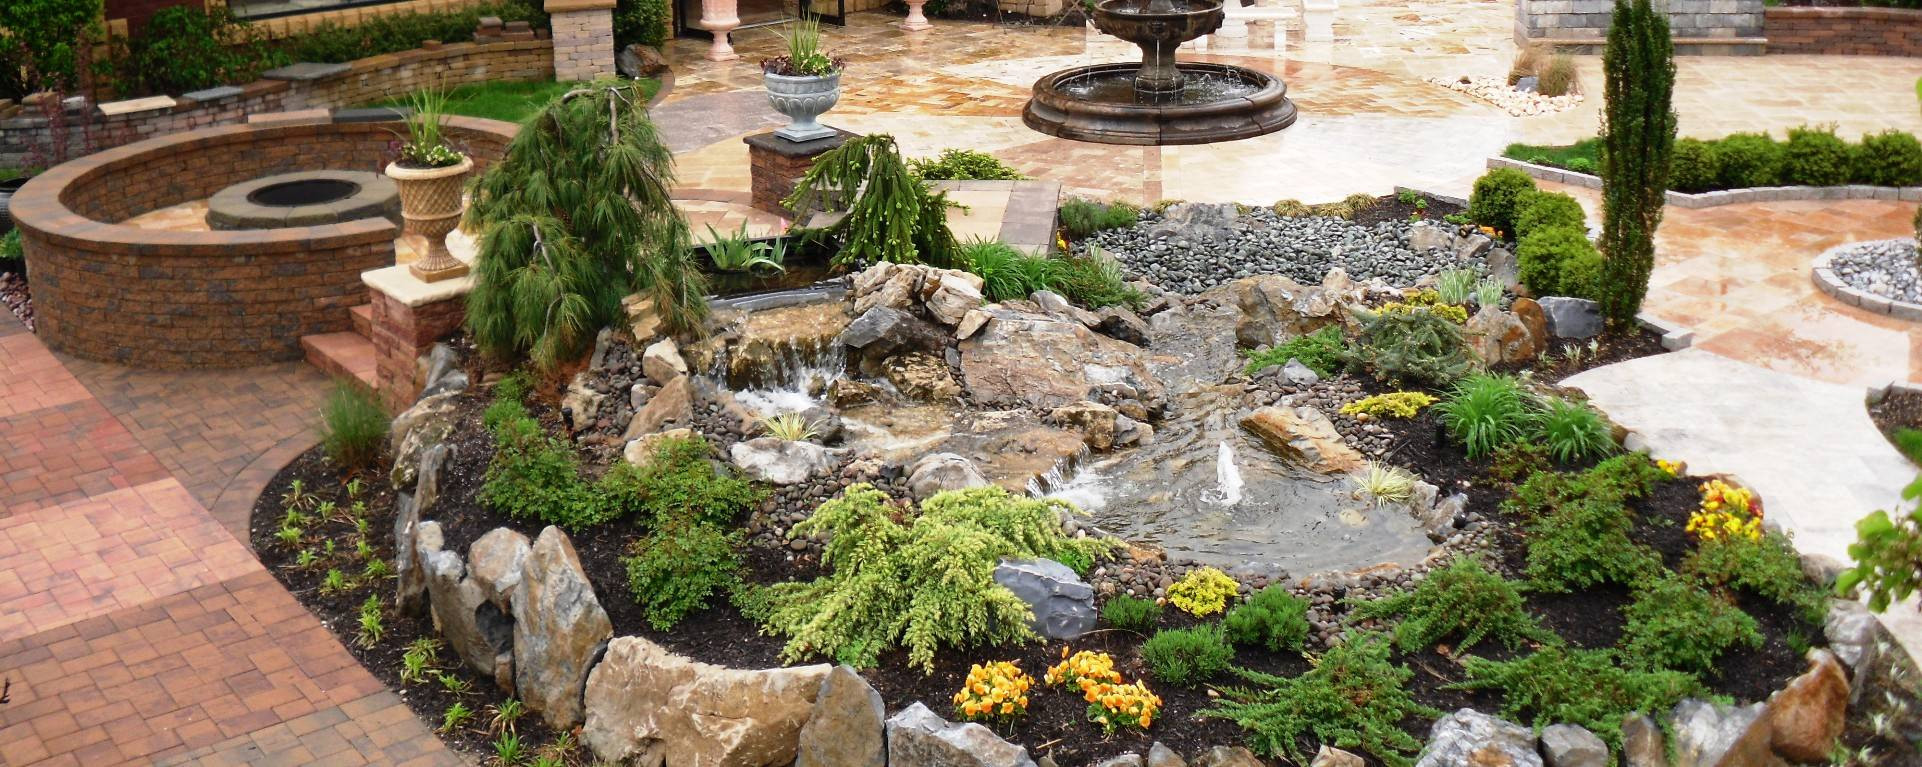 Long Island Landscape Design
 Long Island Water Features Pool Landscaping